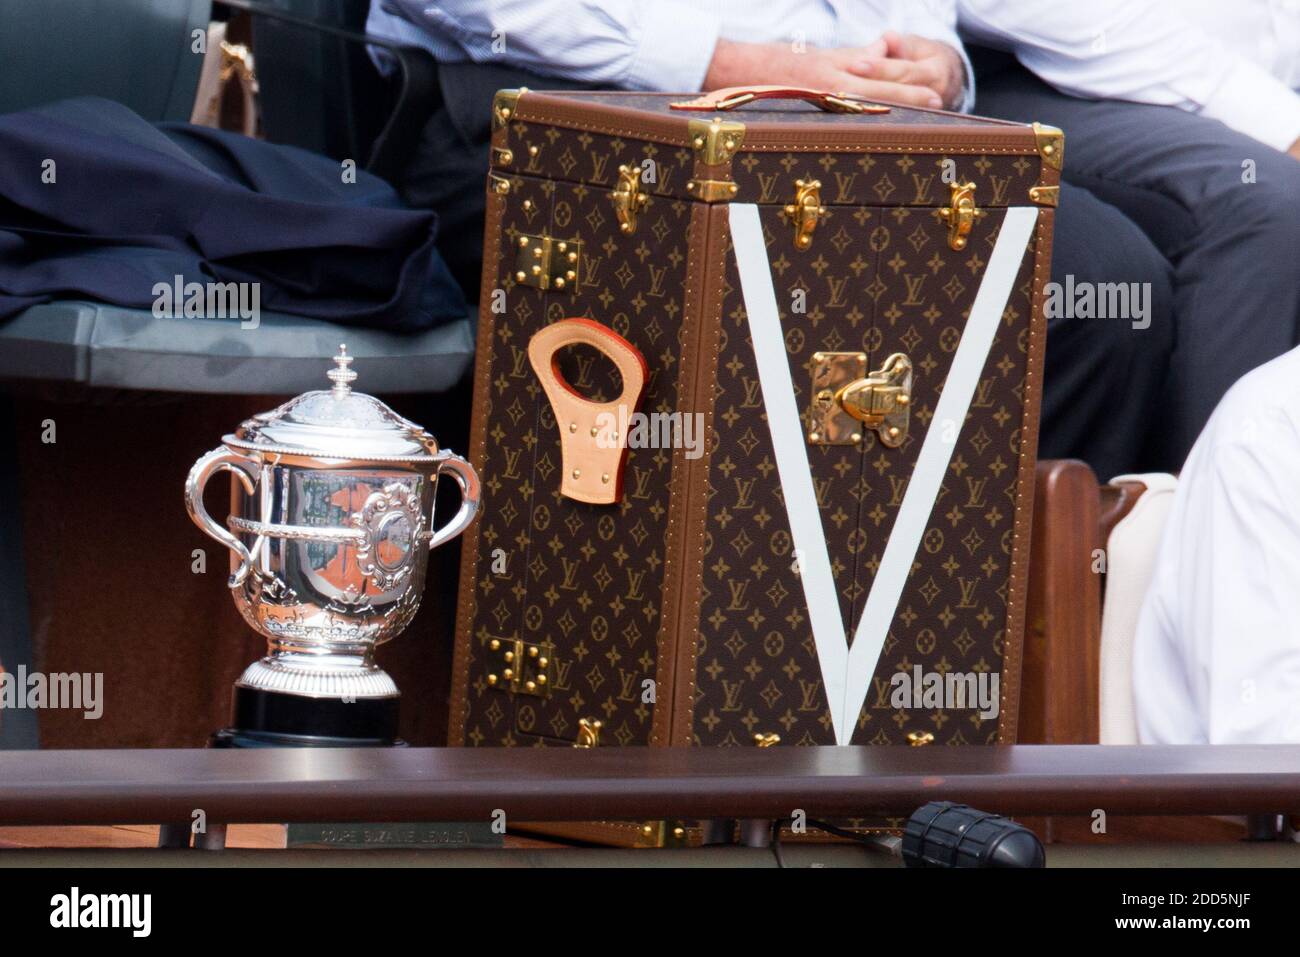 Louis Vuitton's Special French Open Trophy Trunks